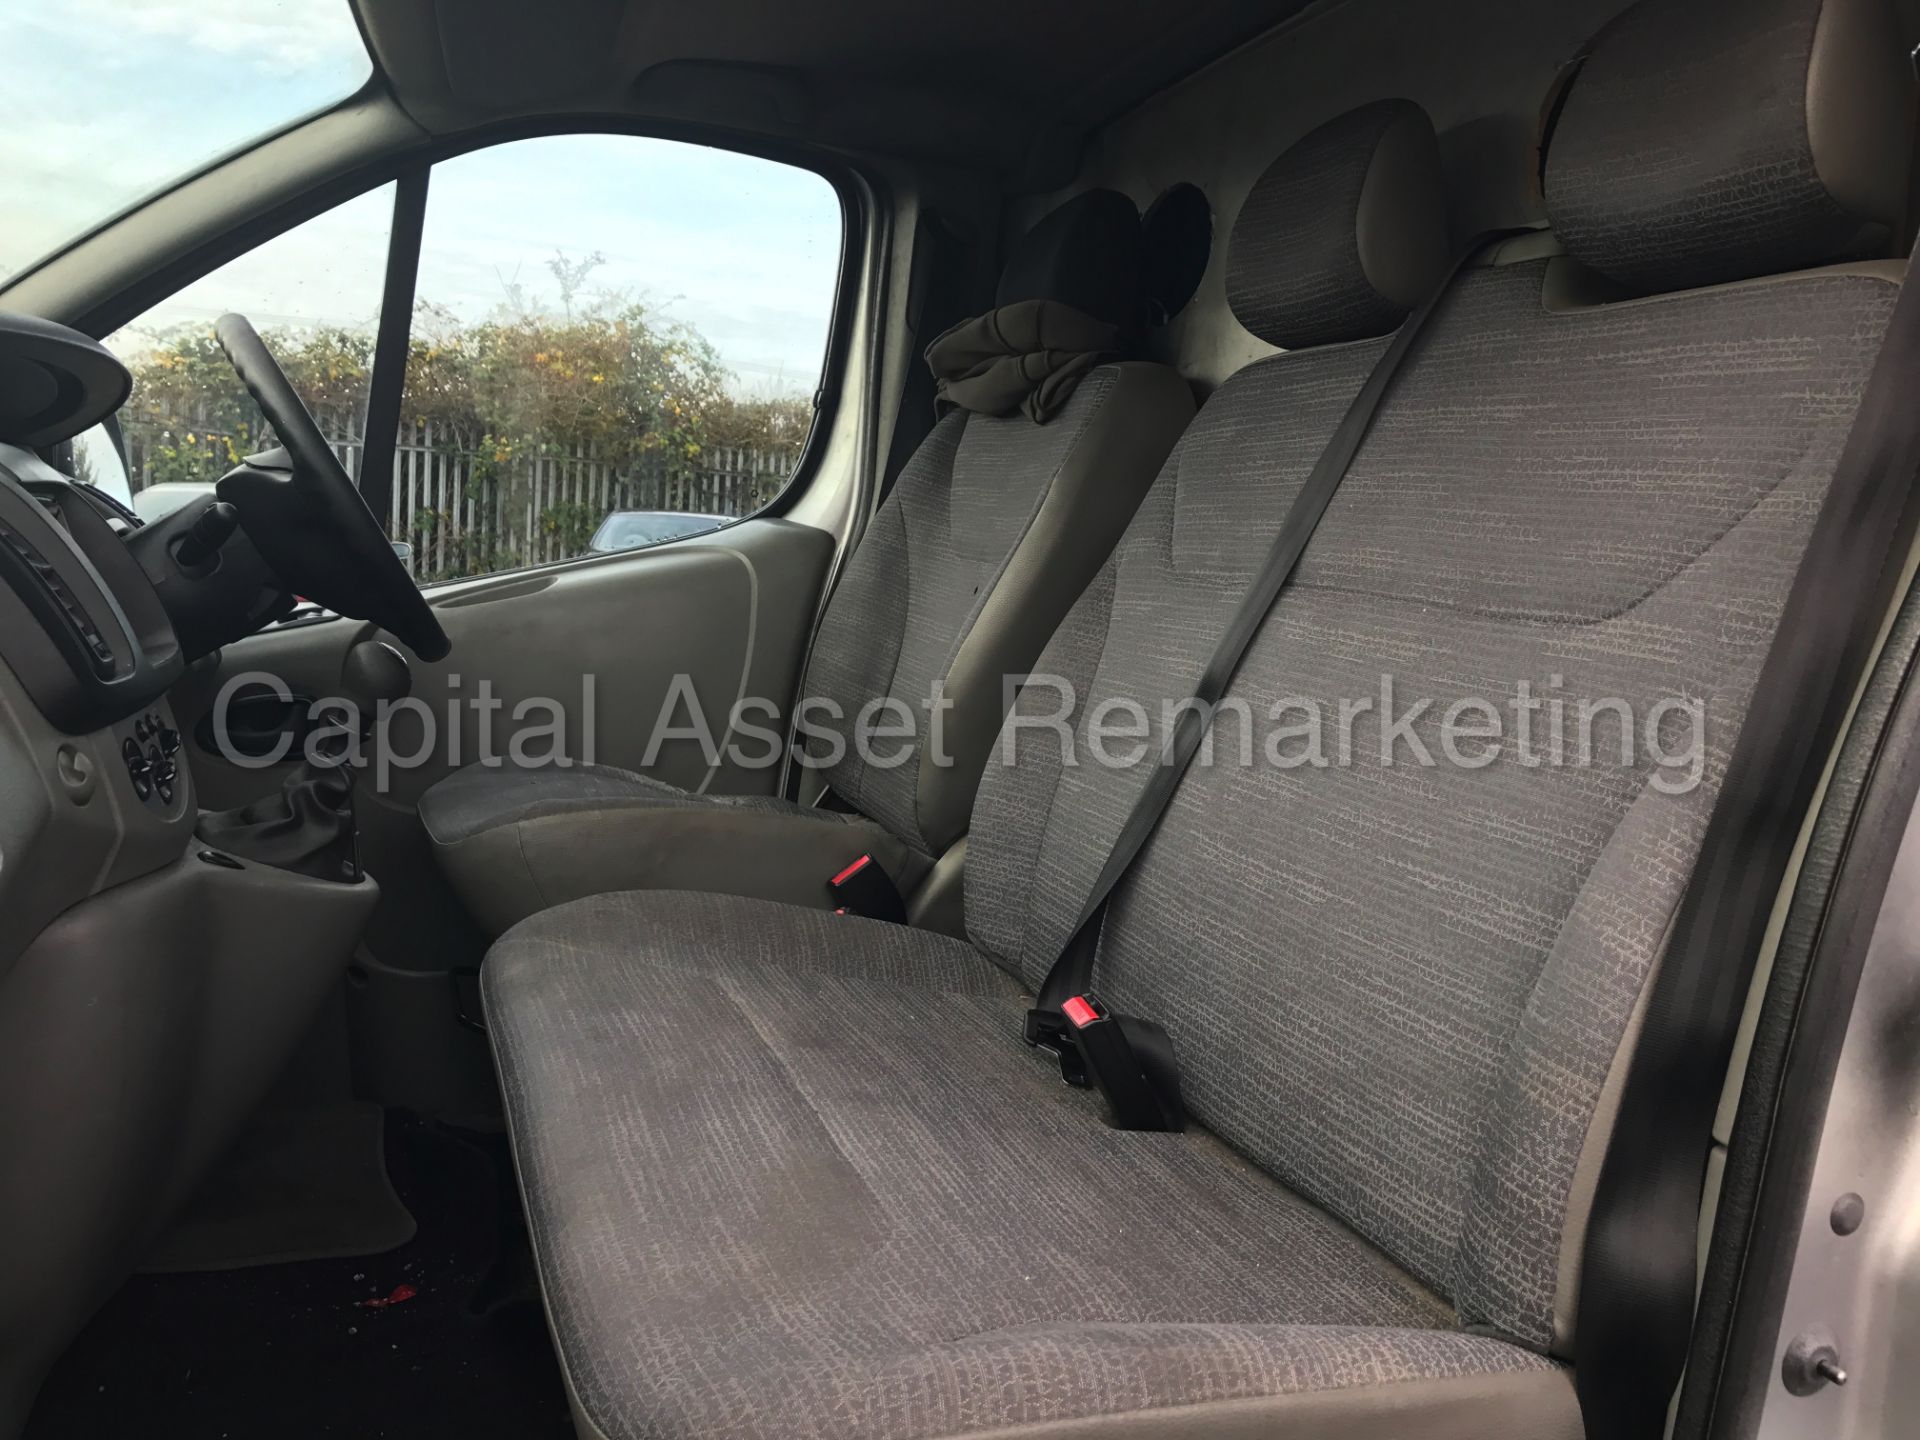 RENAULT TRAFIC LL29 DCI 115 (2010 MODEL) '2.0 DCI - 115 PS - 6 SPEED - LWB' **AIR CON** - Image 13 of 20